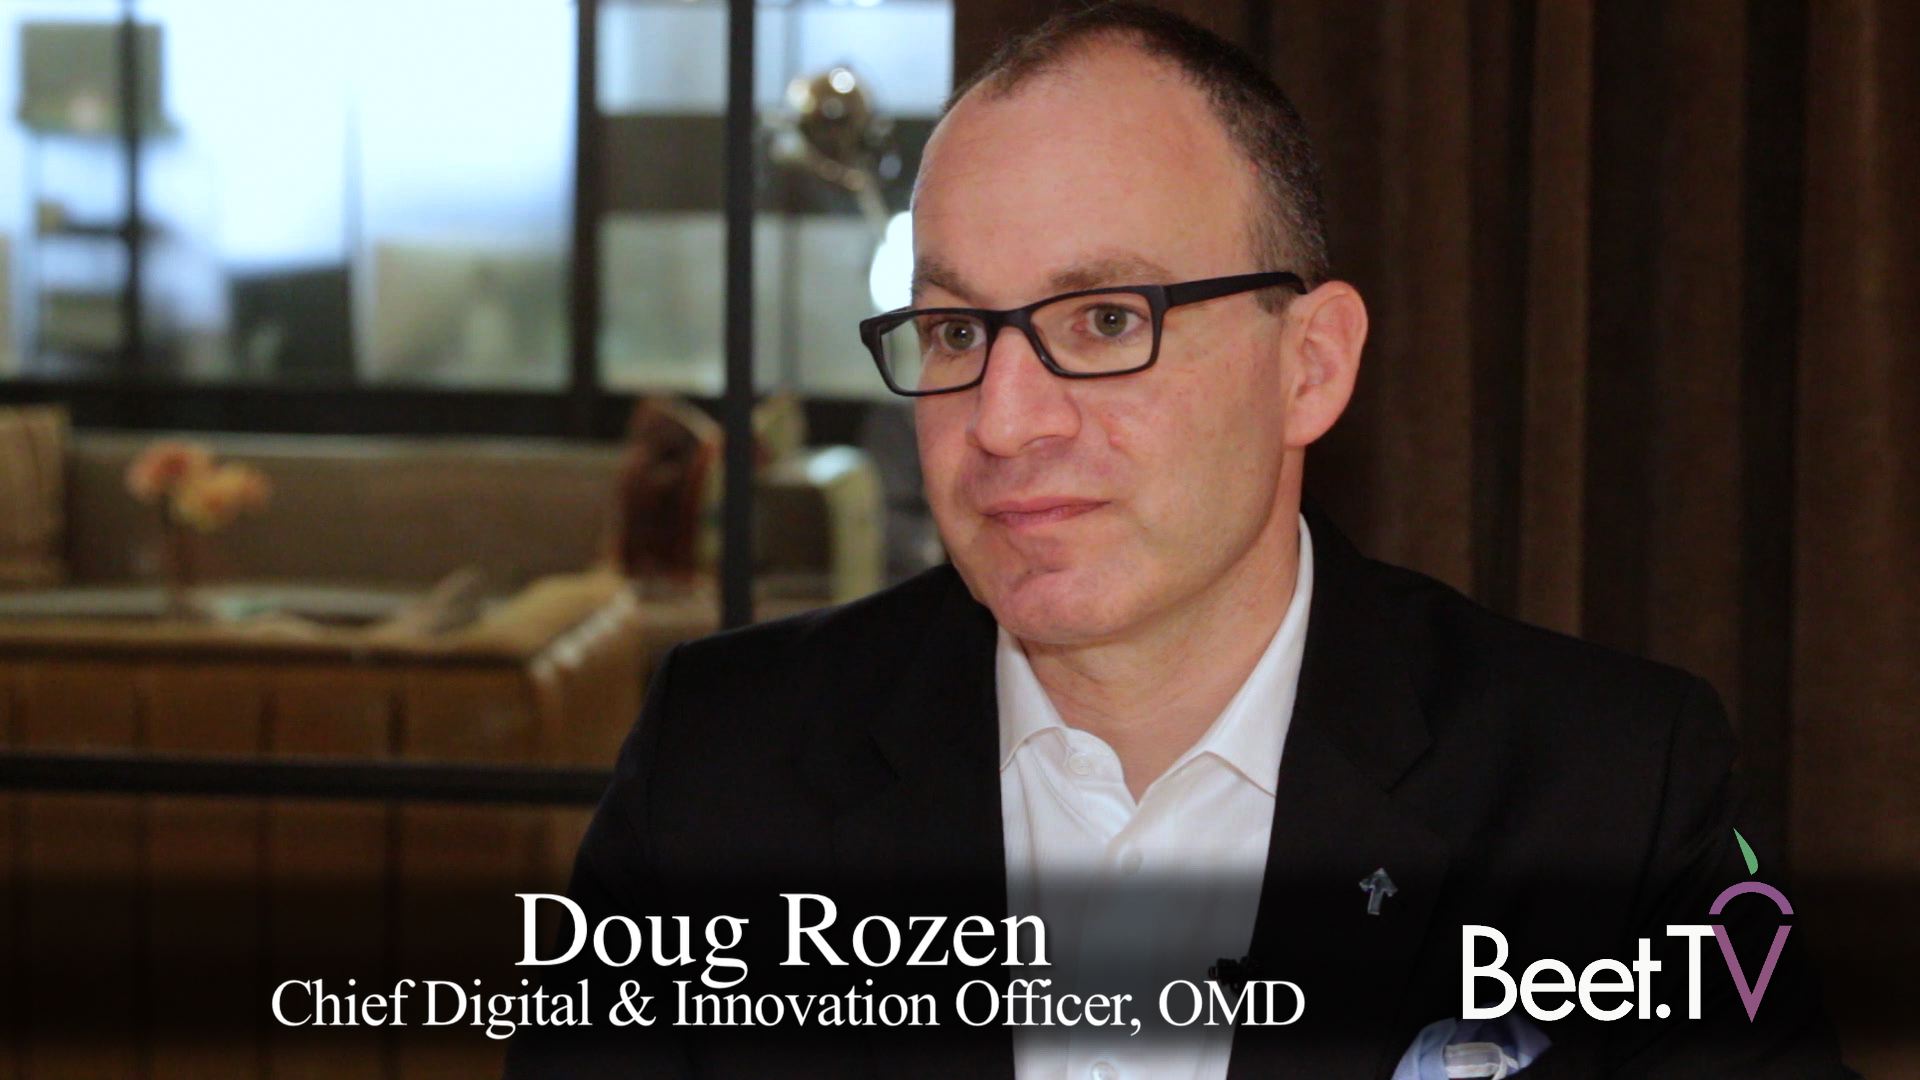 OMD’s Rozen: You Have To Build Stories, Not Just Tell Them